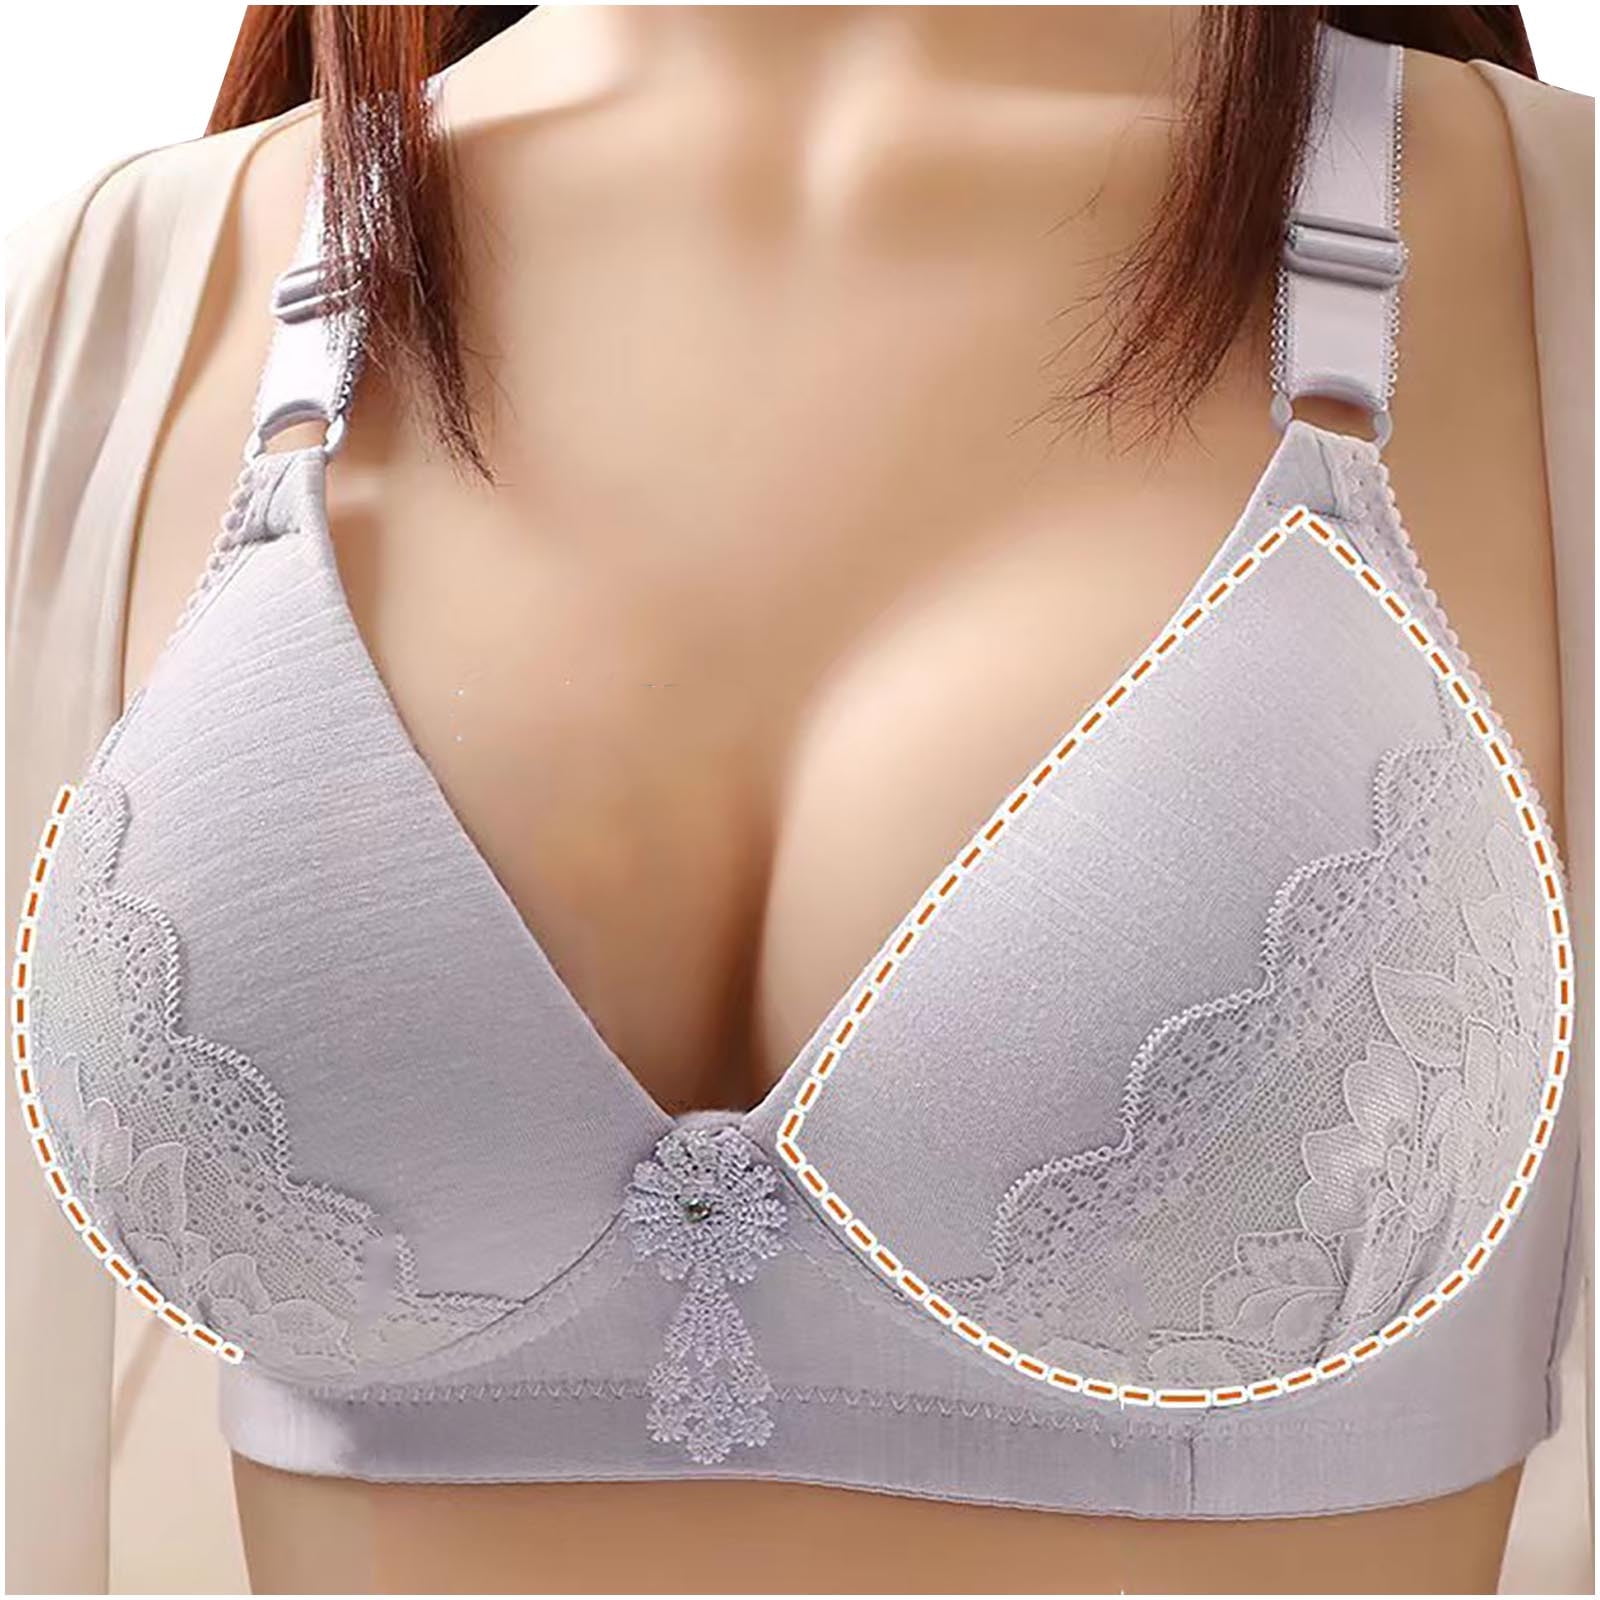 RYRJJ Women's Deep Cup Bralette Lace Floral Unpadded No Underwire Everyday  Shaping Bra Solid Wireless Lightly Lined Comfortable Push Up Bra(Gray,S) 